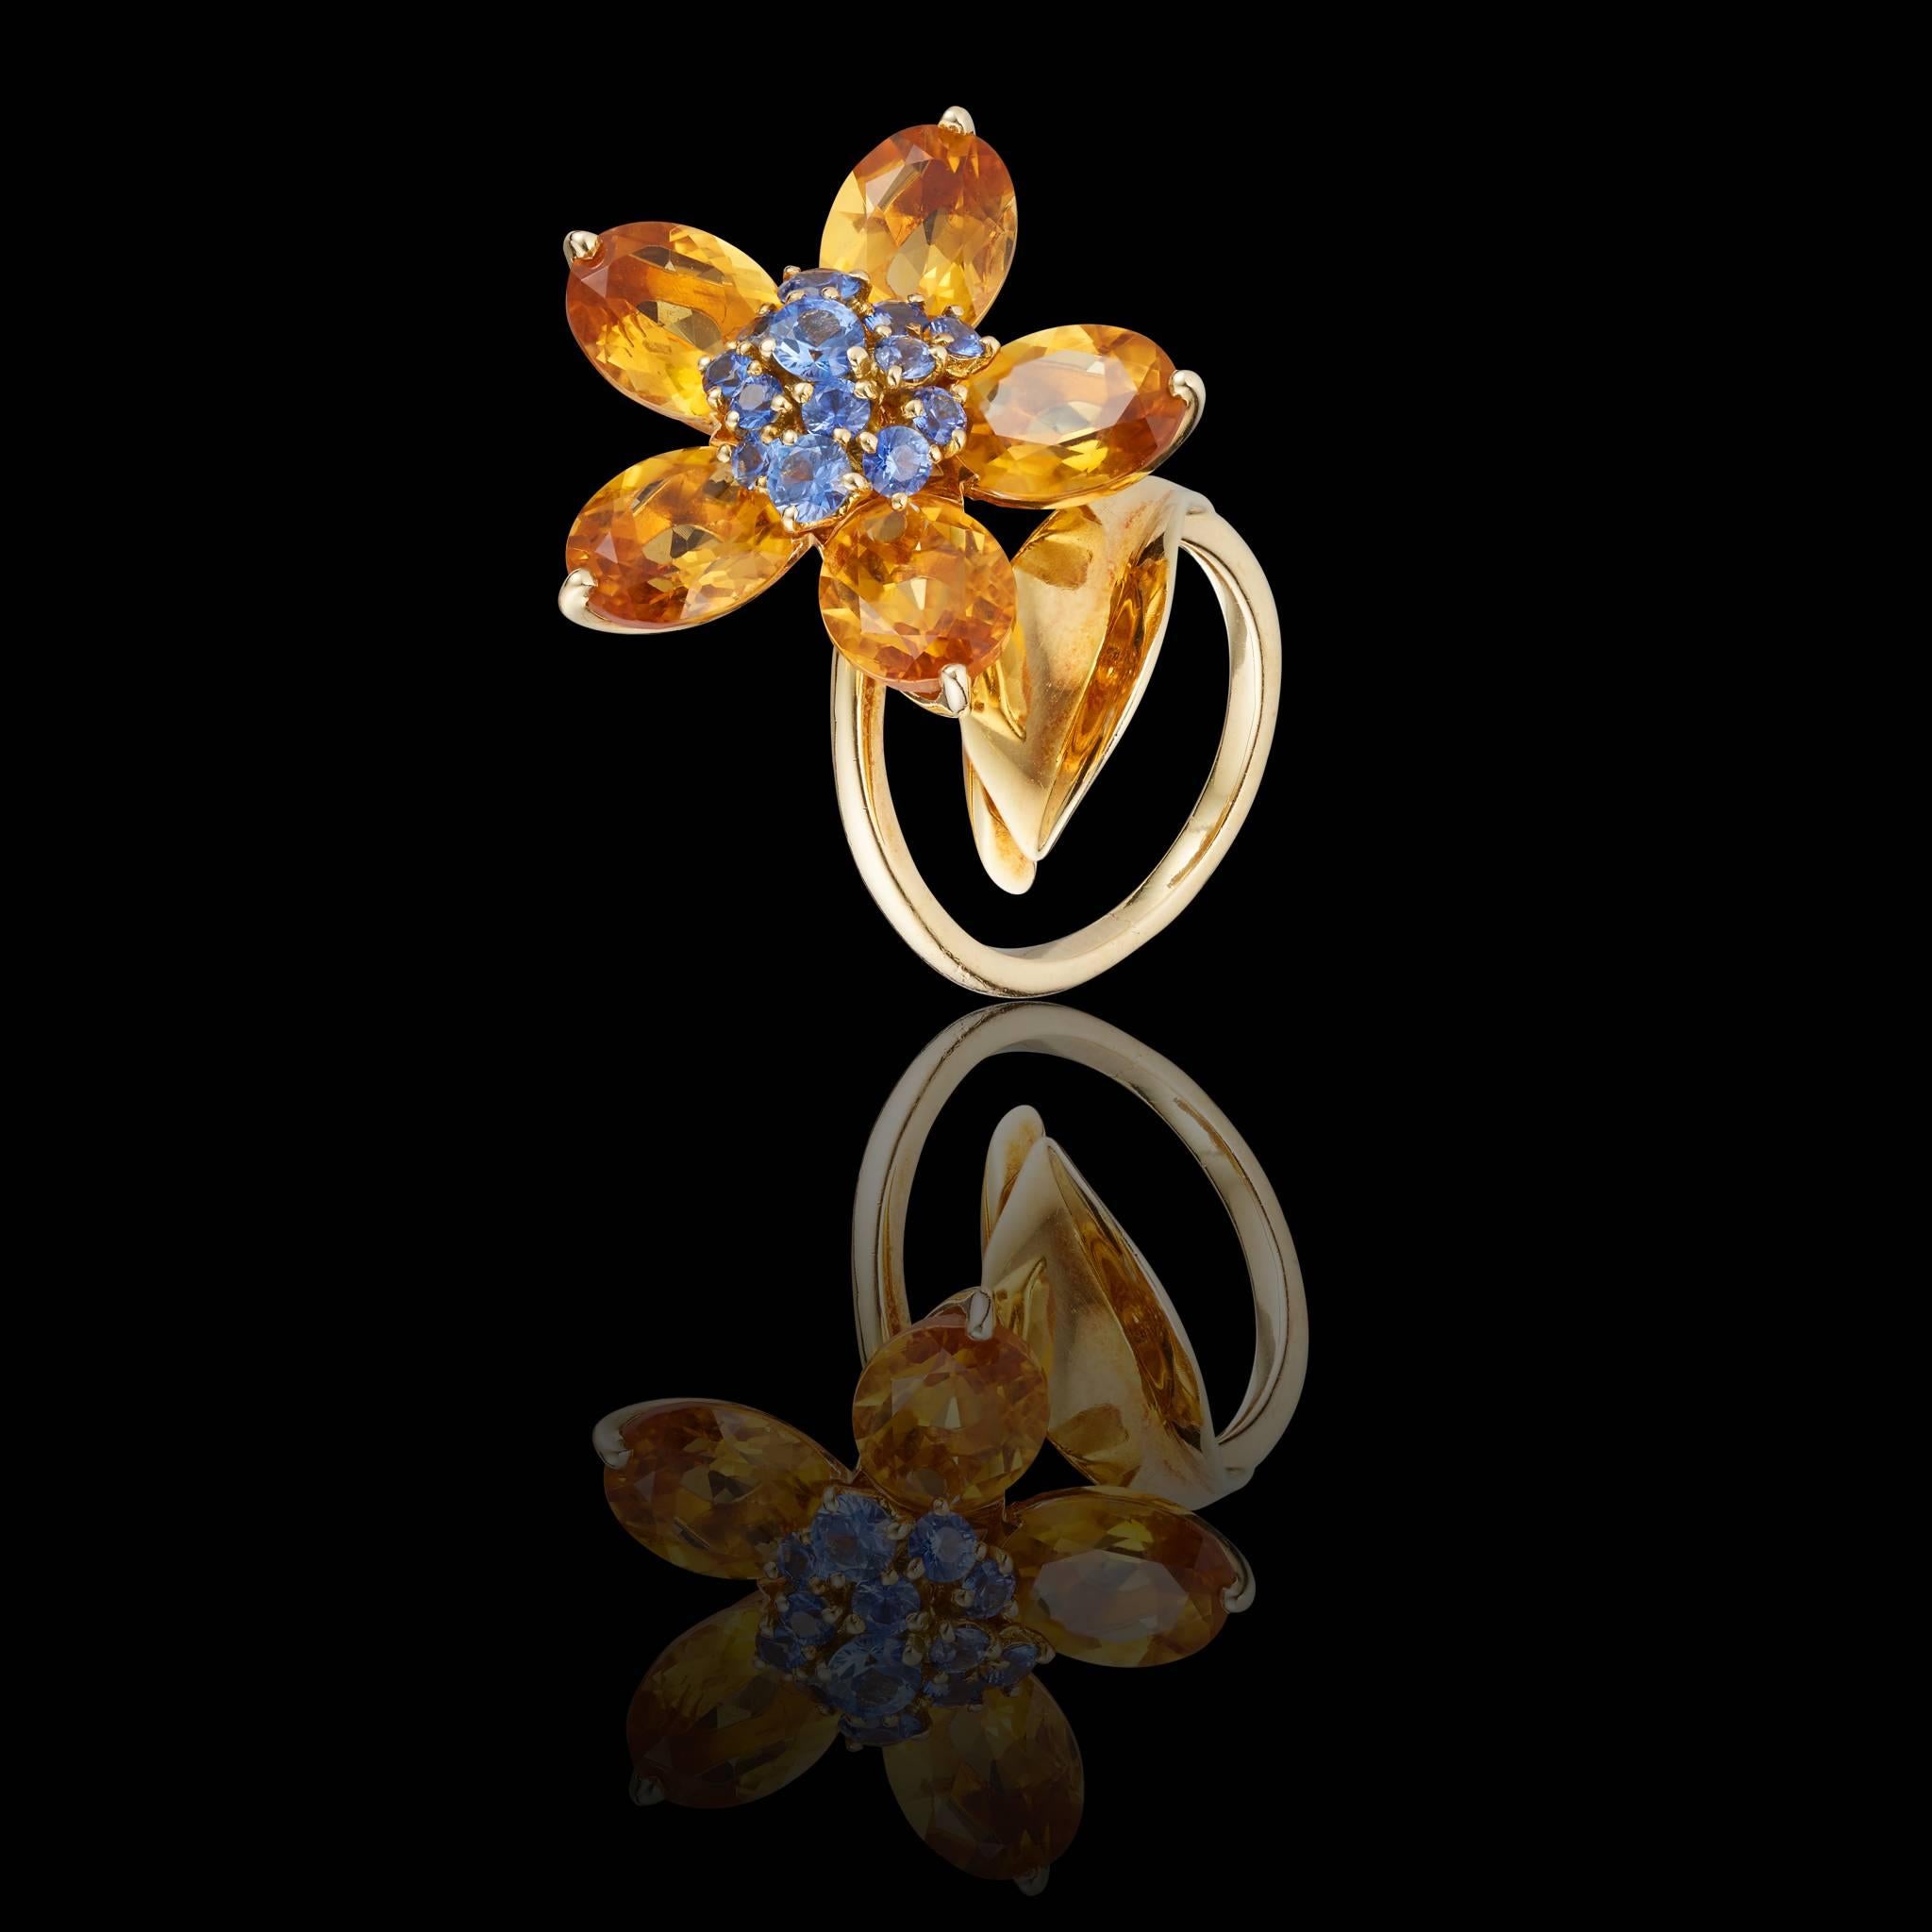 Van Cleef & Arpels sapphires and citrines ring made in 18k gold featuring an open band accented with a leaf and rotatable flower made of 5 faceted citrines petals and a cluster of faceted blue